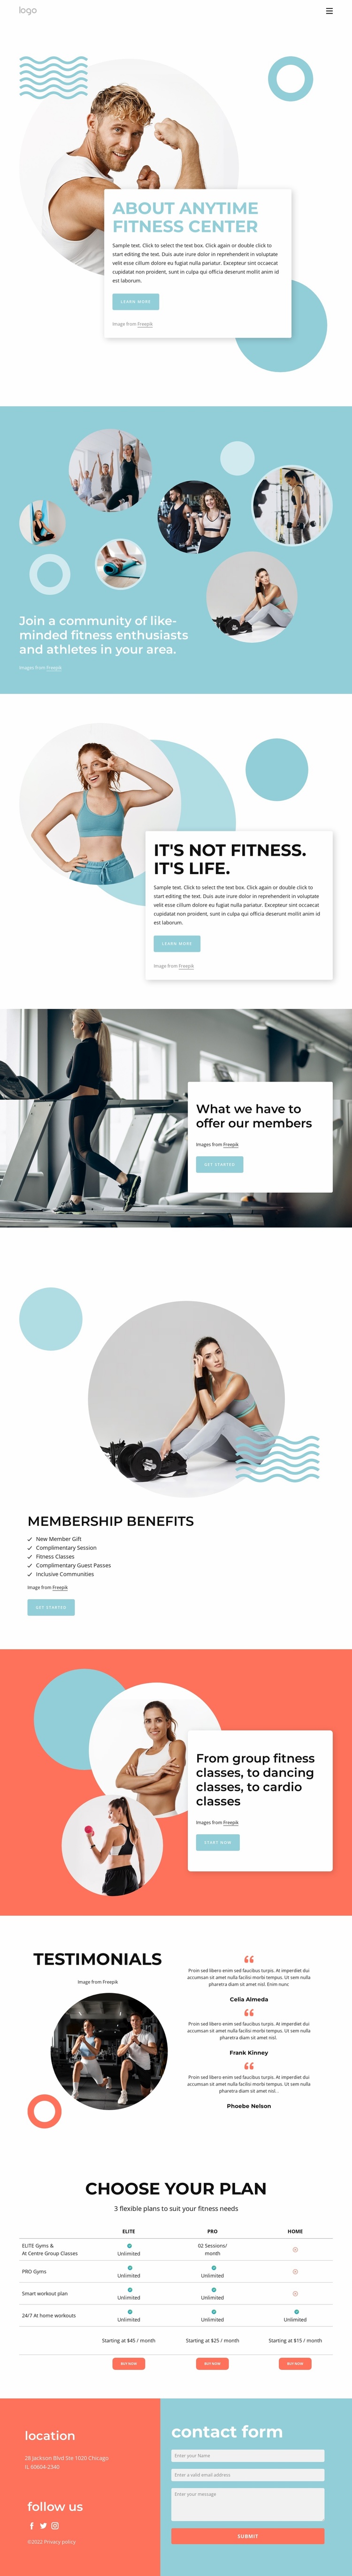 About Anytime fitness center Landing Page